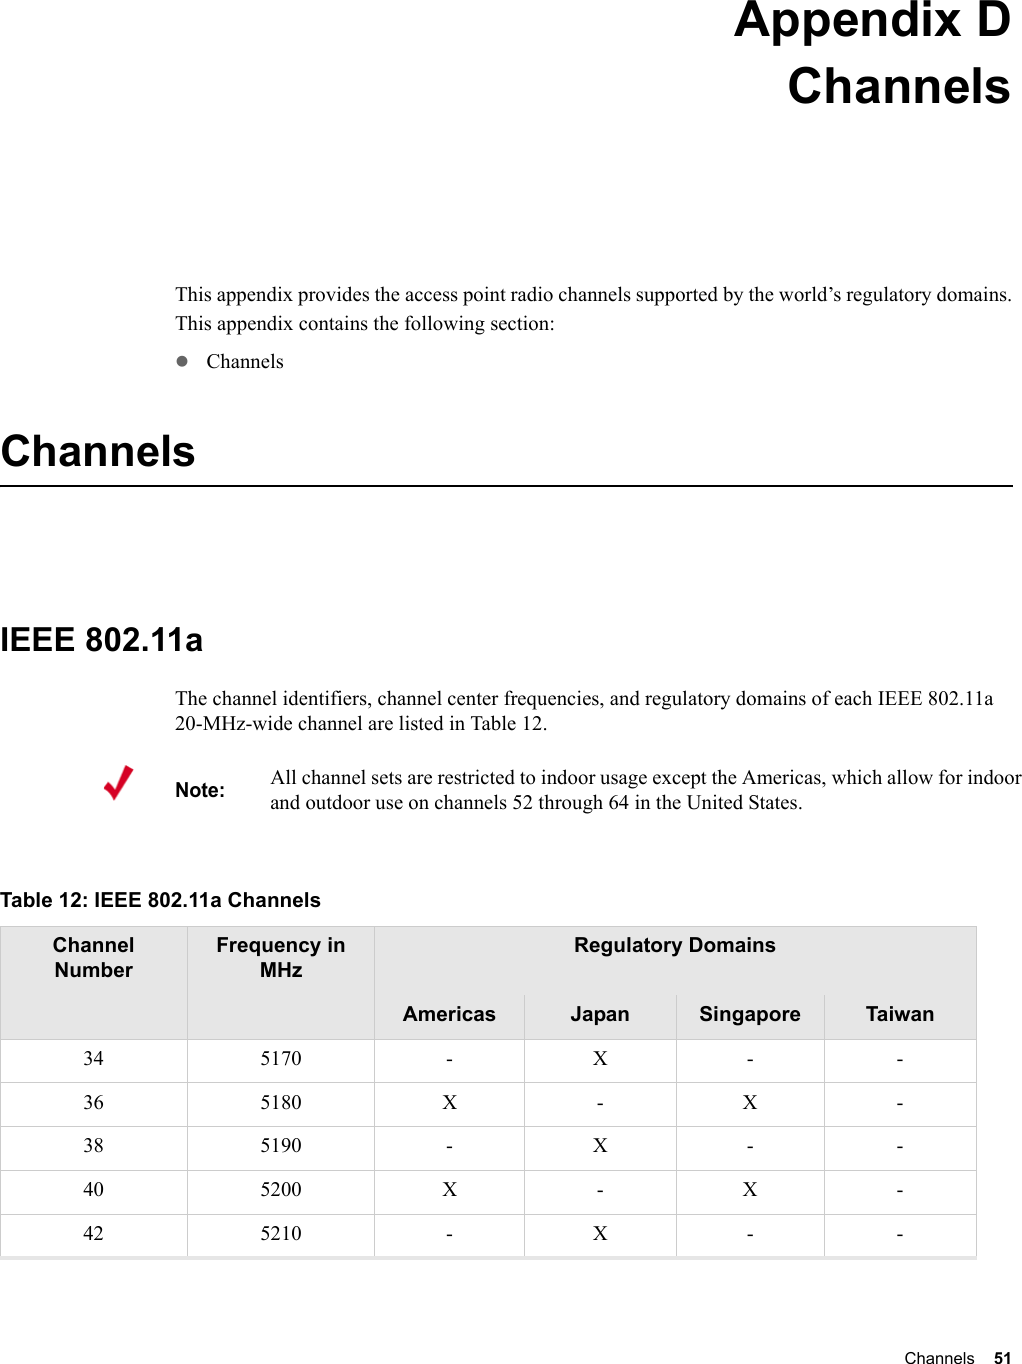 Channels 51 Appendix DChannelsB-1This appendix provides the access point radio channels supported by the world’s regulatory domains.This appendix contains the following section:zChannelsChannelsIEEE 802.11aThe channel identifiers, channel center frequencies, and regulatory domains of each IEEE 802.11a 20-MHz-wide channel are listed in Table 12. Note:All channel sets are restricted to indoor usage except the Americas, which allow for indoor and outdoor use on channels 52 through 64 in the United States. Table 12: IEEE 802.11a Channels Channel NumberFrequency in MHzRegulatory DomainsAmericas Japan Singapore Taiwan34 5170 - X - -36 5180 X - X -38 5190 - X - -40 5200 X - X -42 5210 - X - -